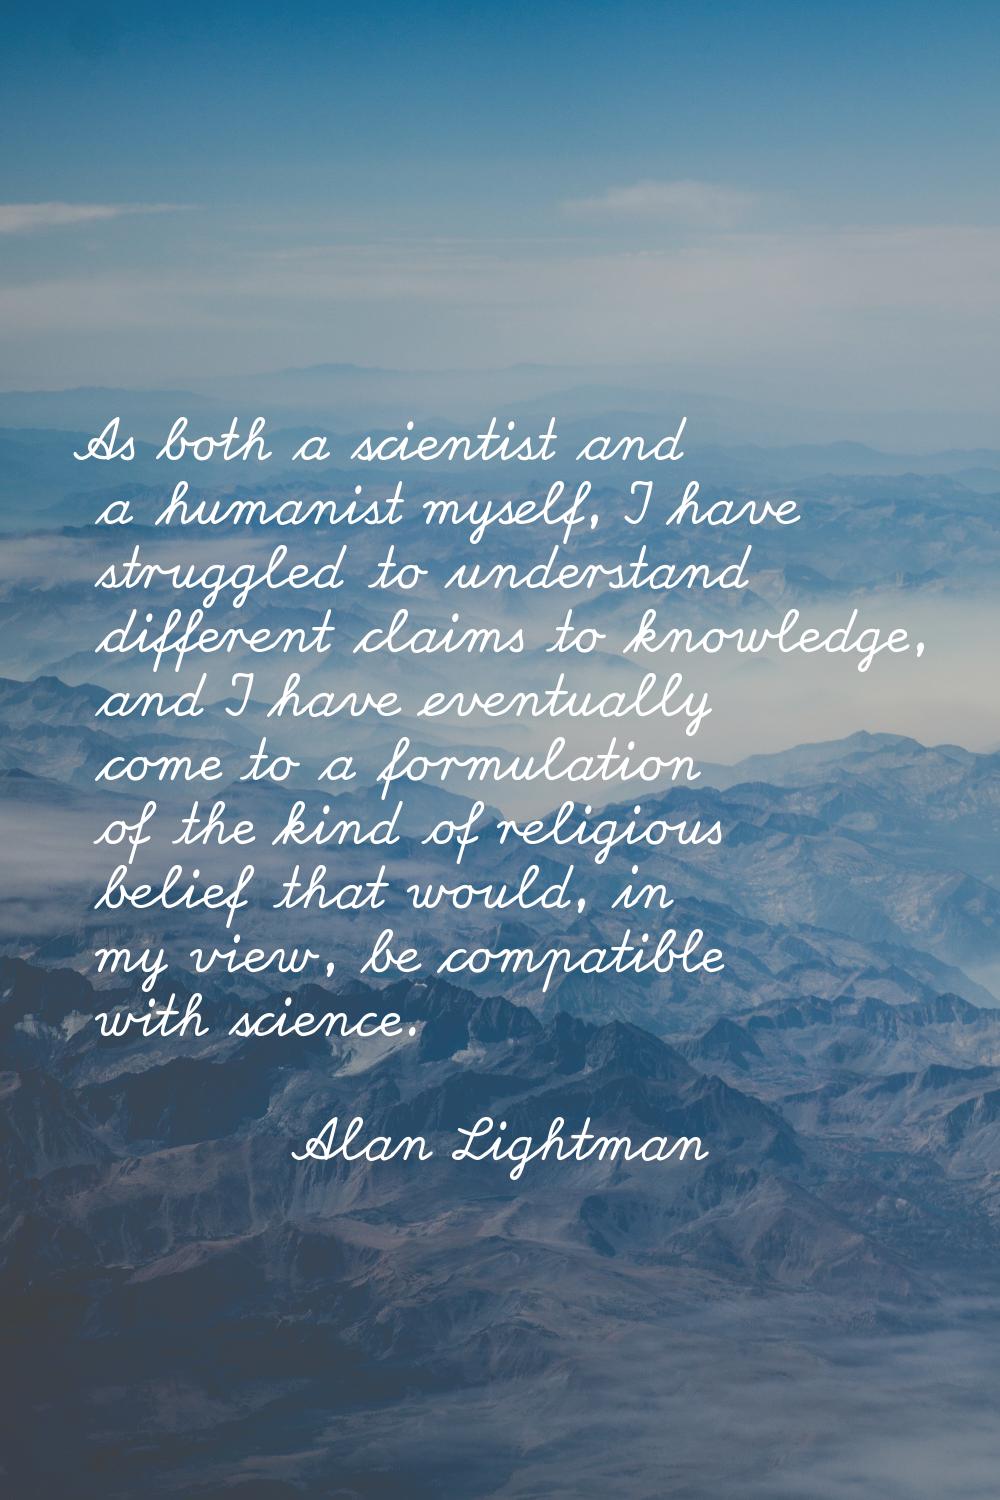 As both a scientist and a humanist myself, I have struggled to understand different claims to knowl